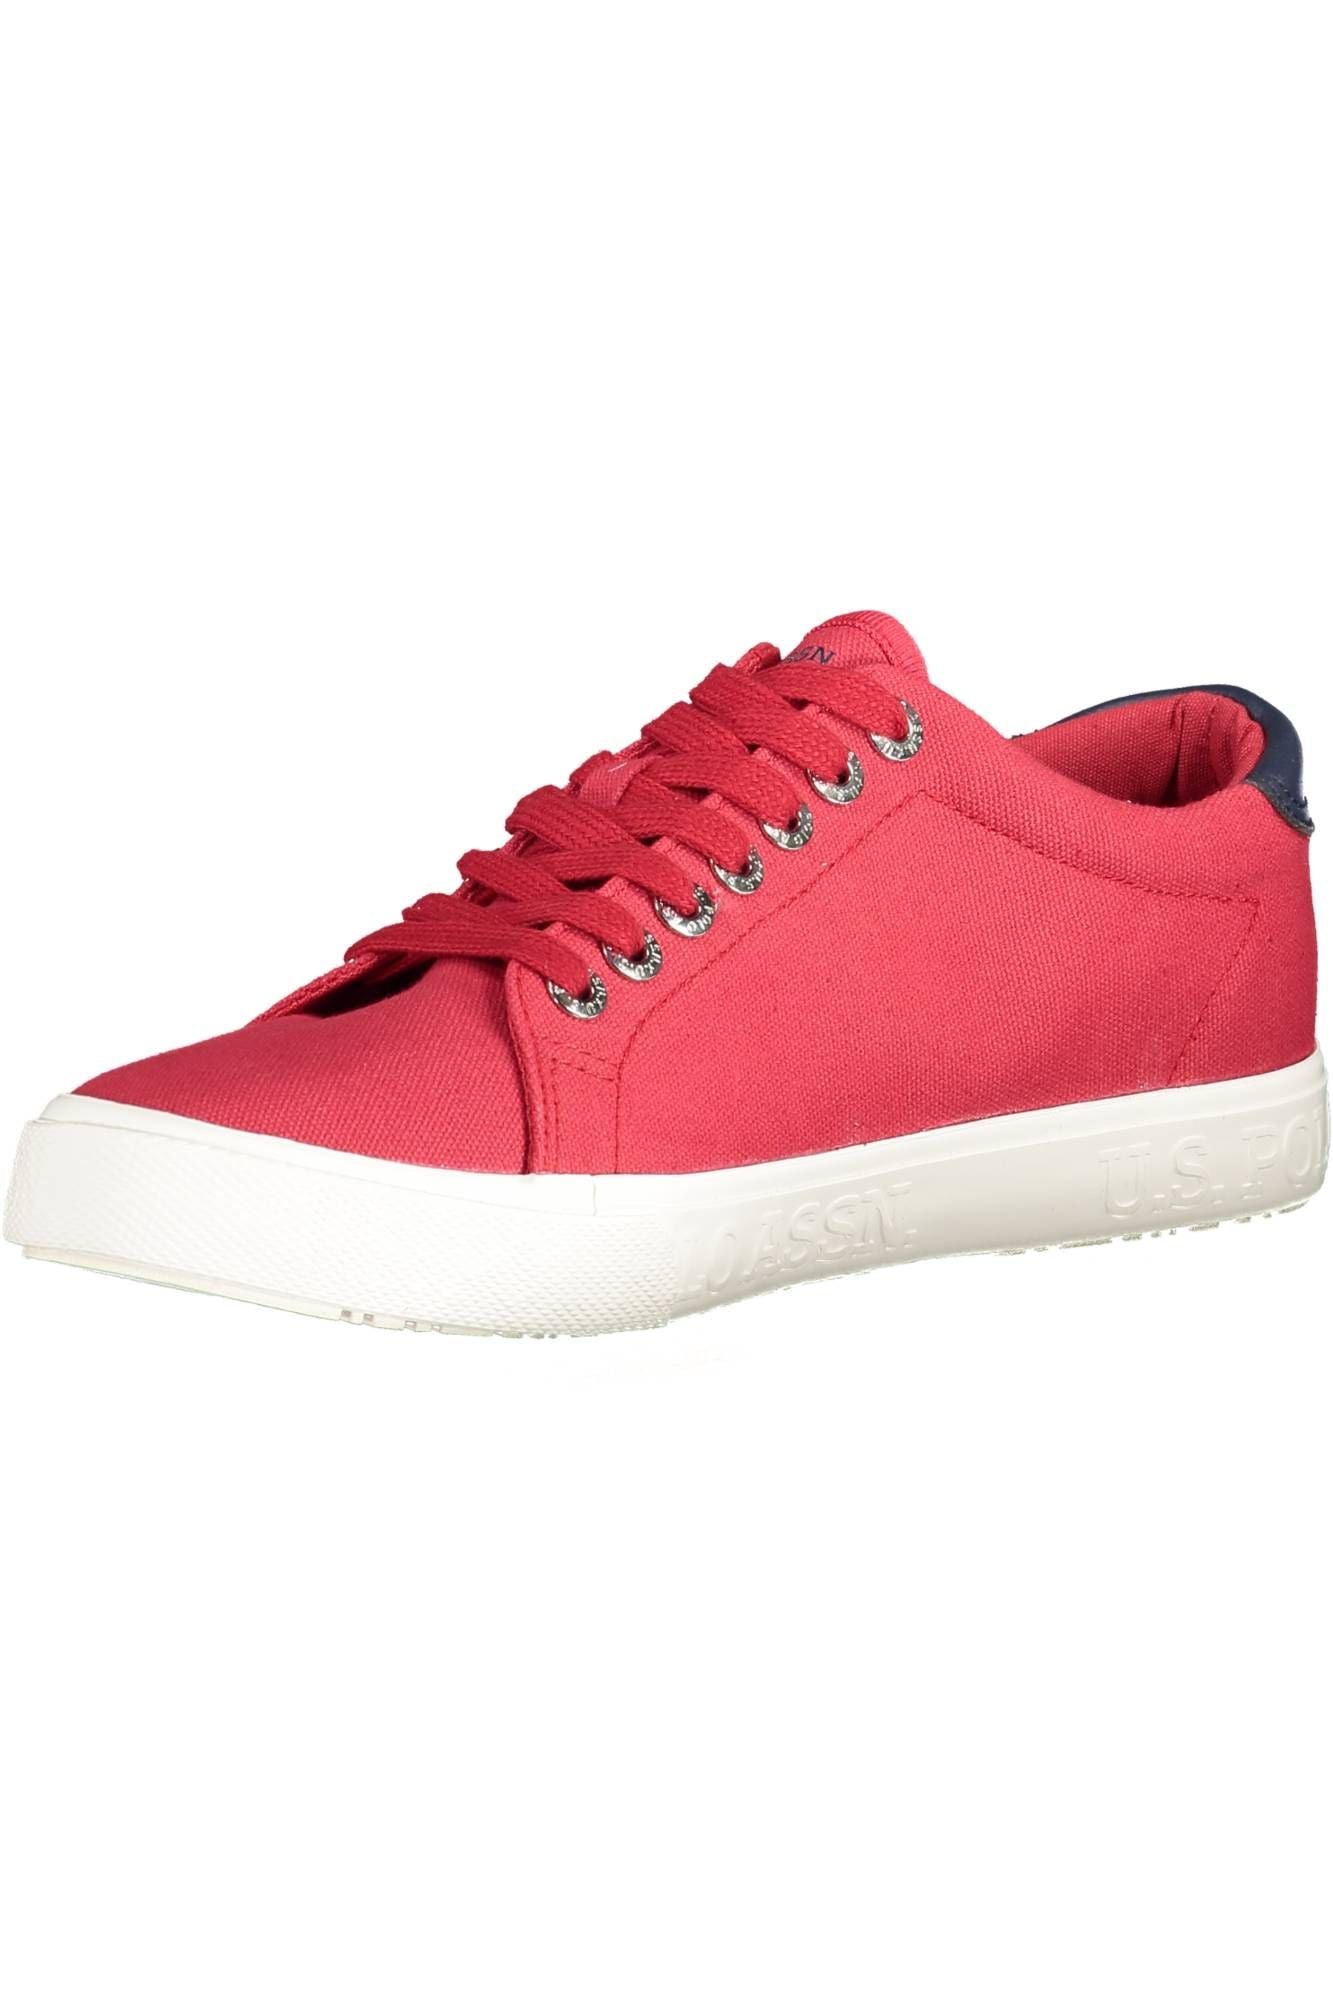 Classic Red Lace-Up Sports Sneakers